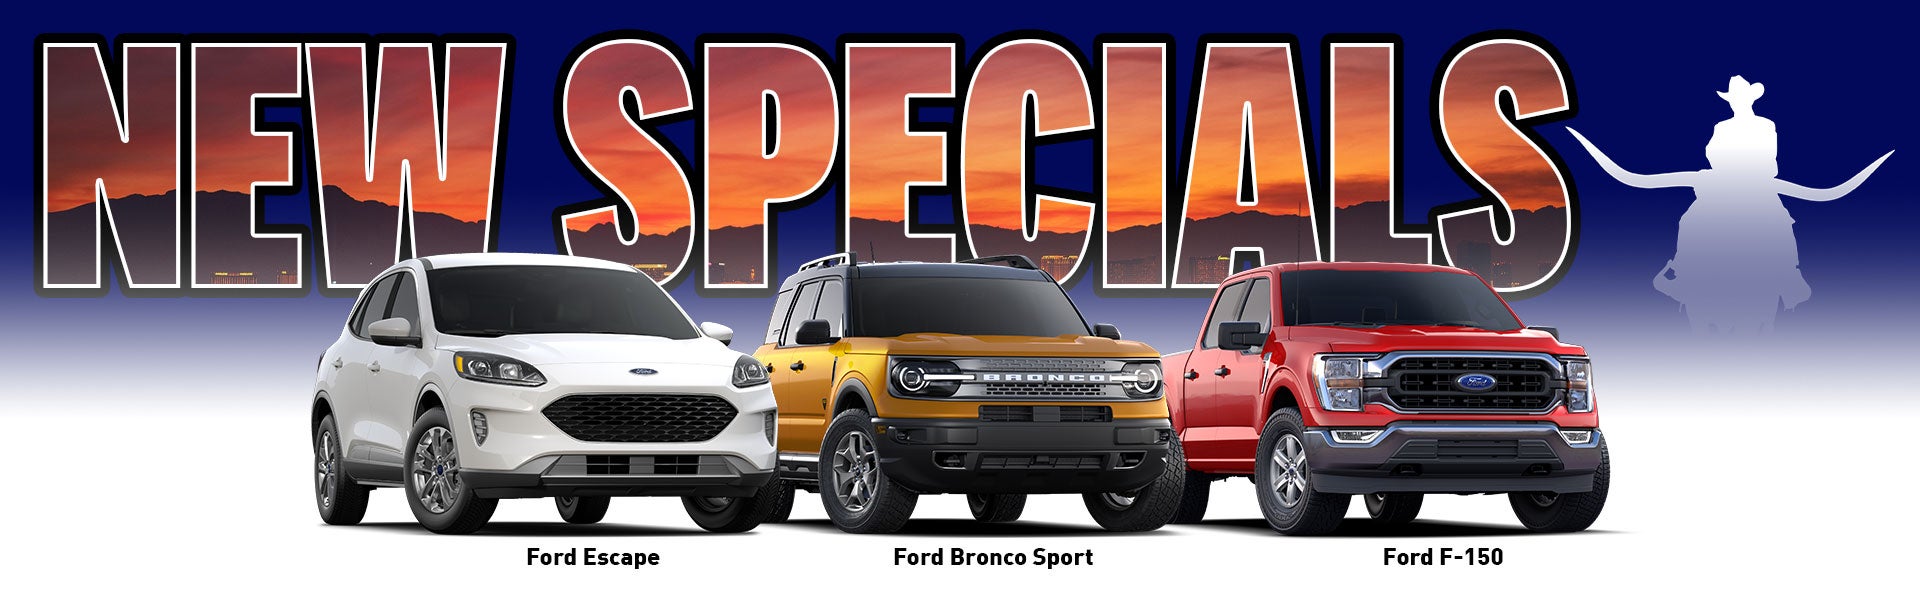 New Ford Inventory Arriving Daily